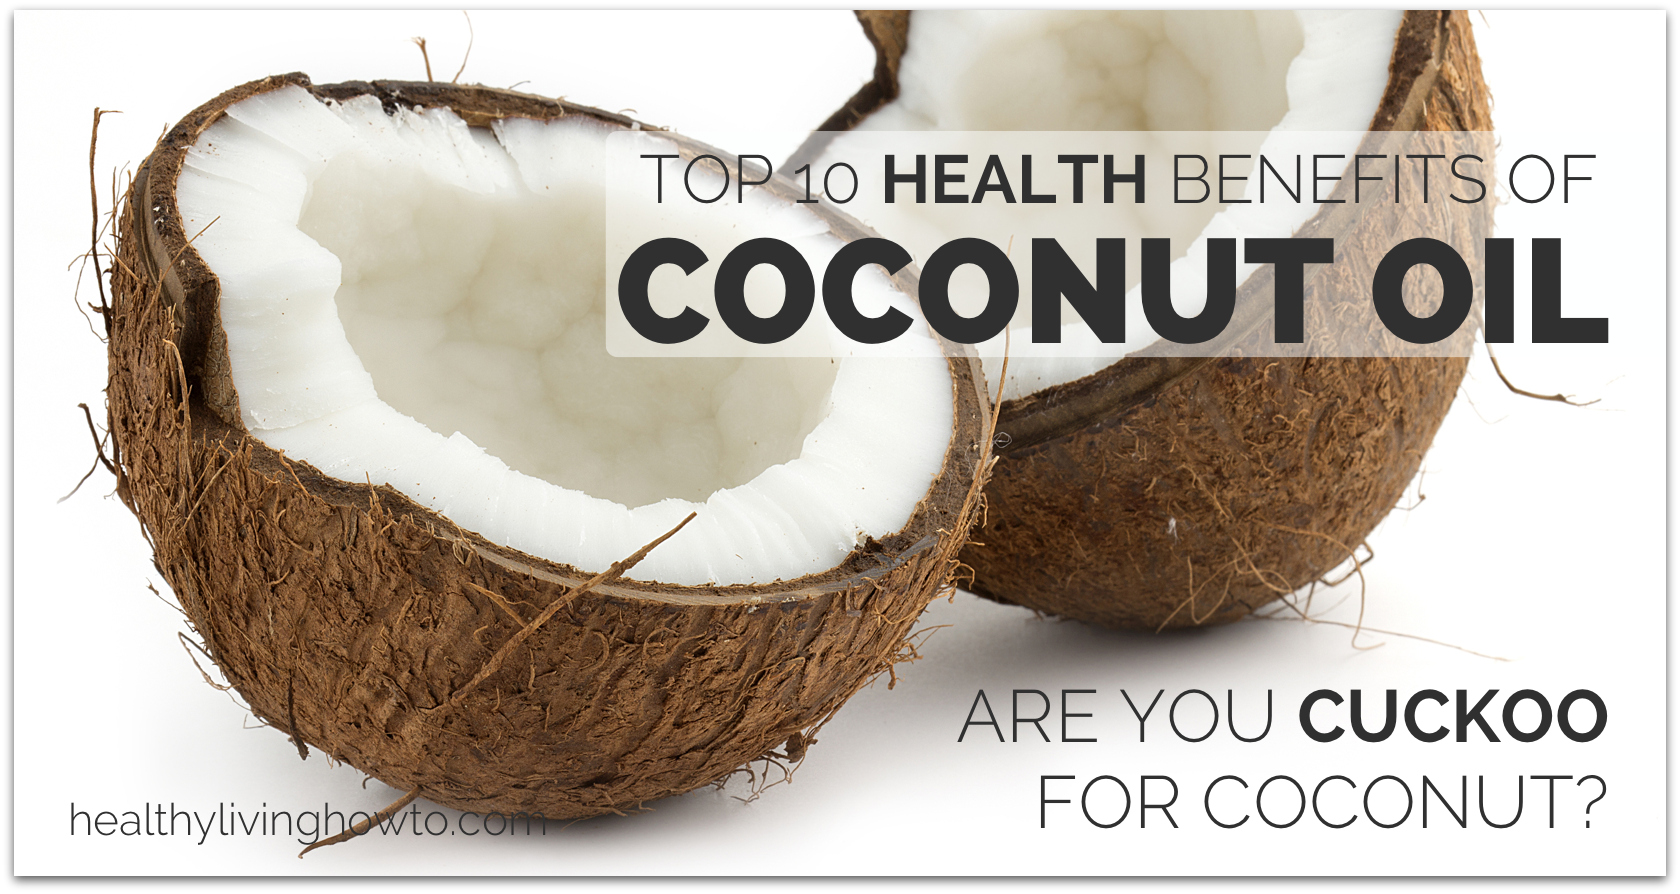 Top 10 Health Benefits Of Coconut Oil healthylivinghowto.com